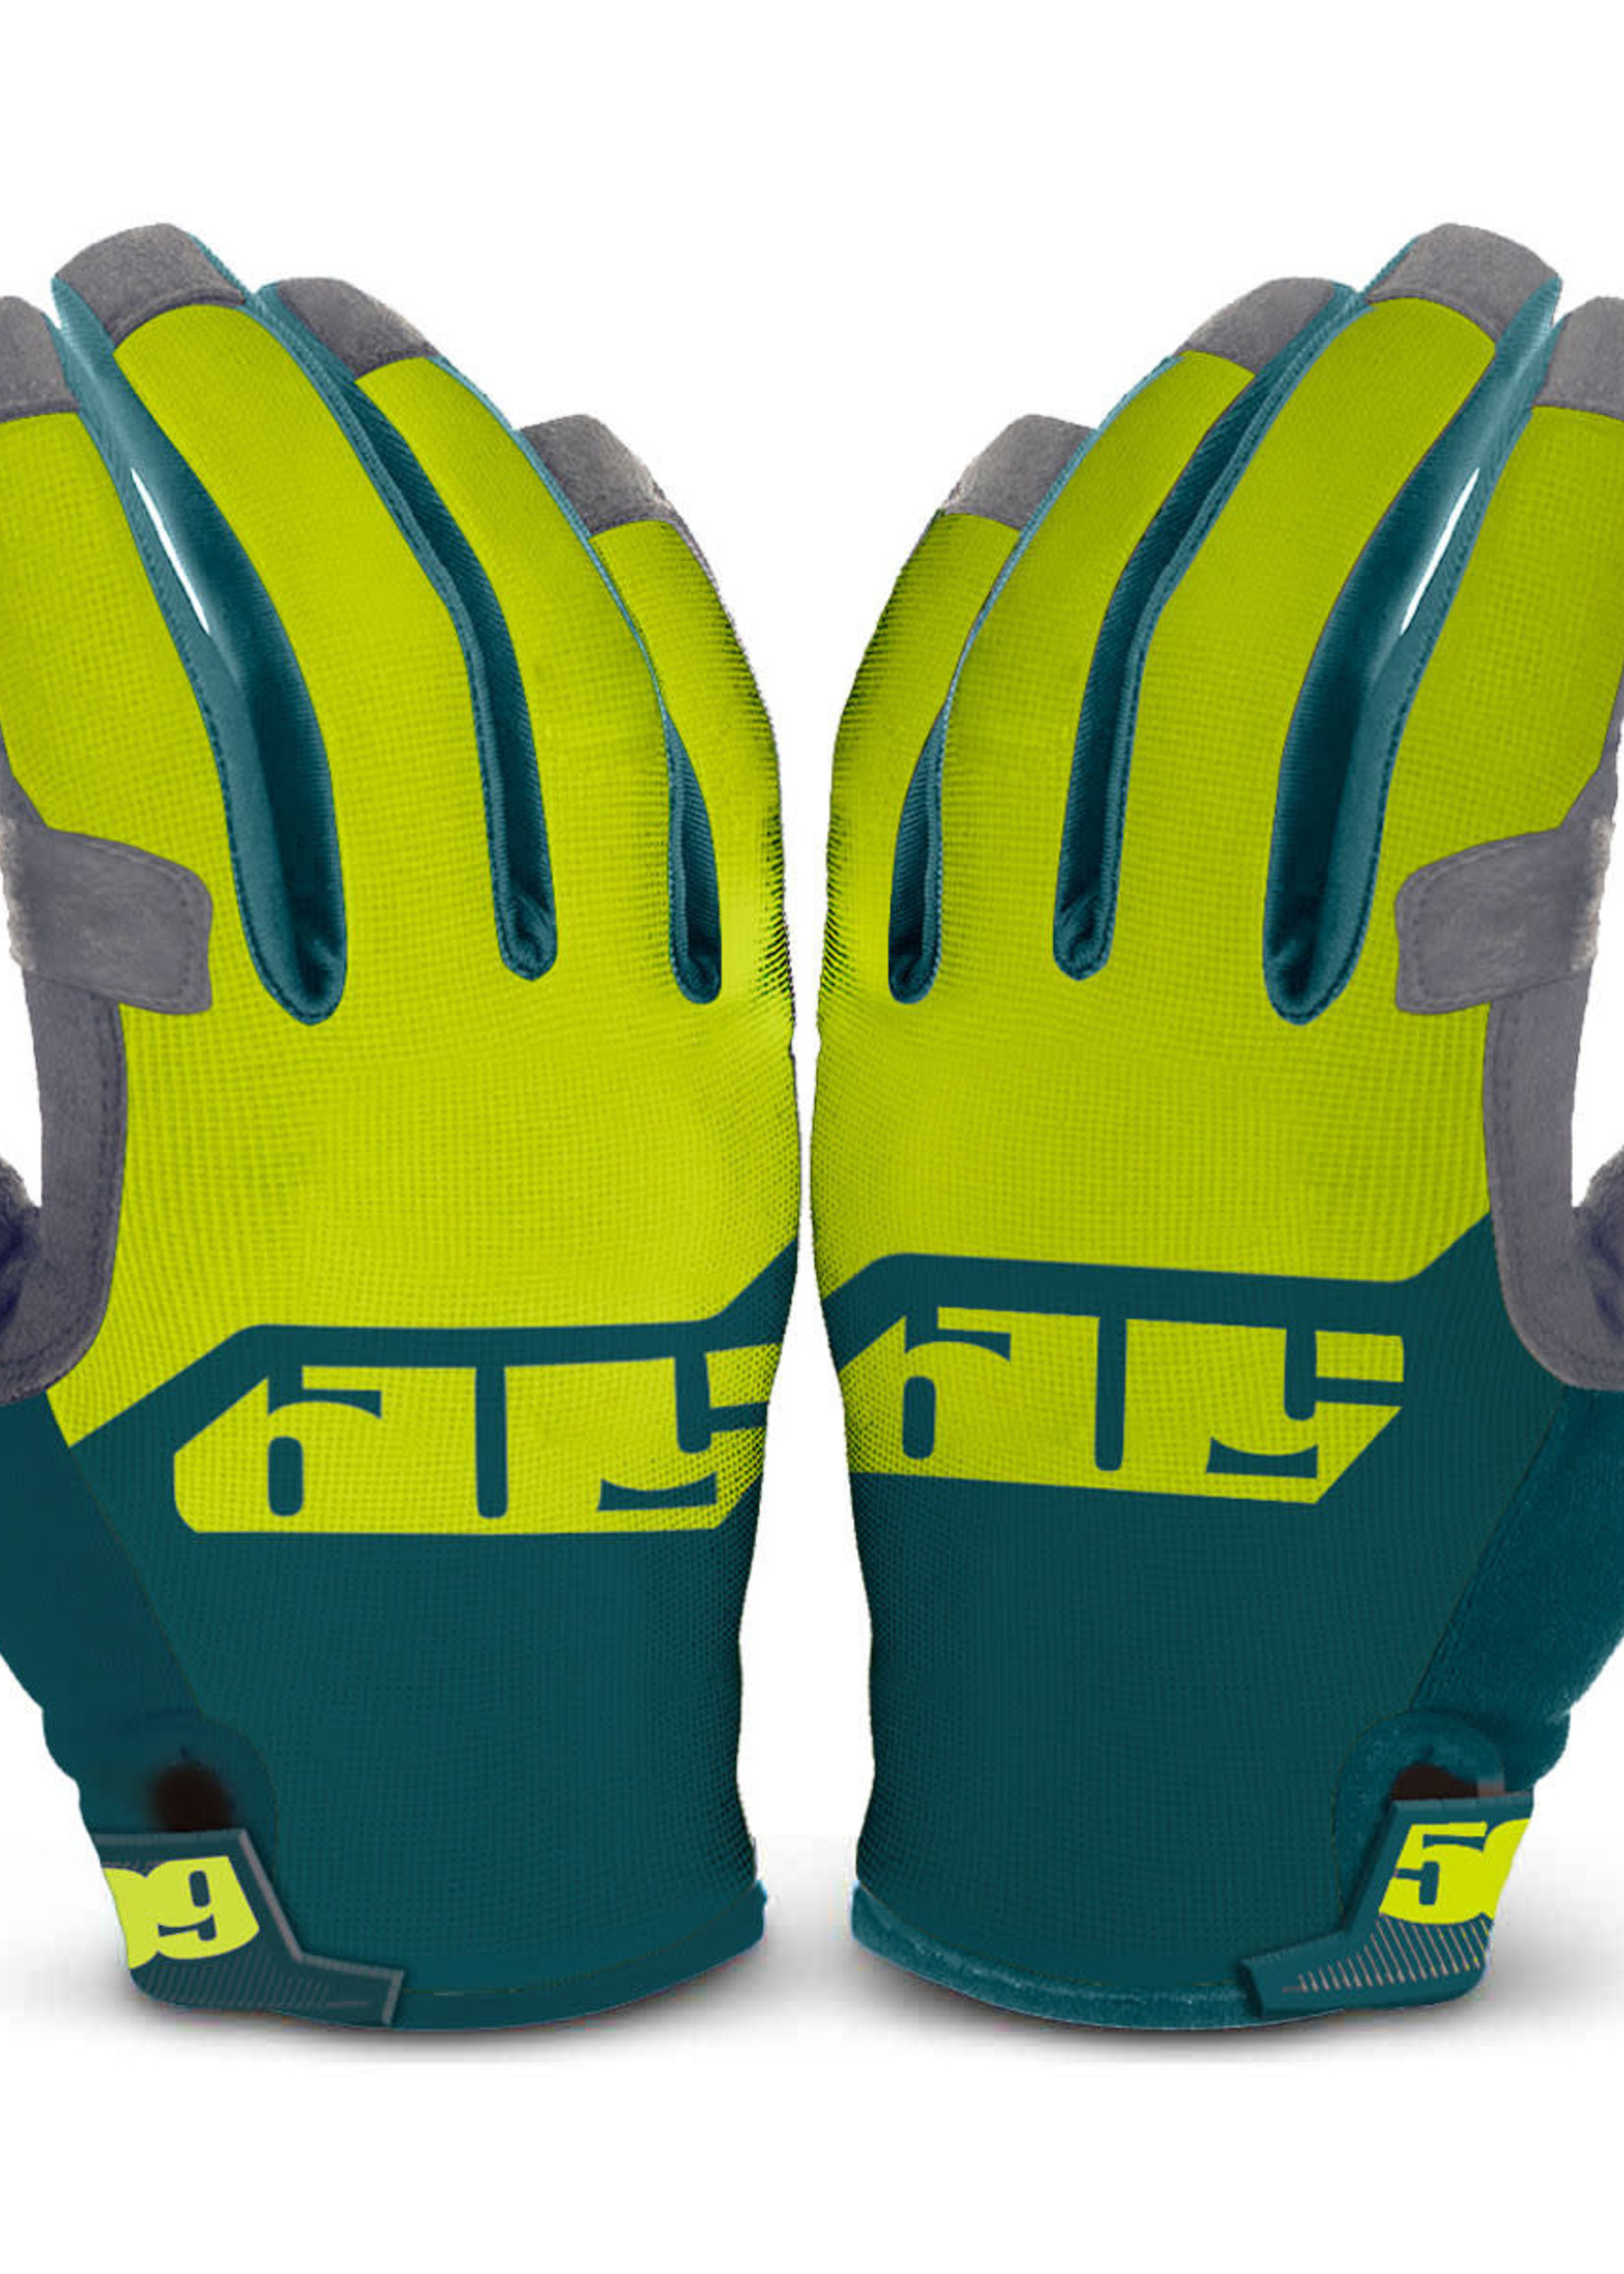 509 509 LOW 5 Gloves